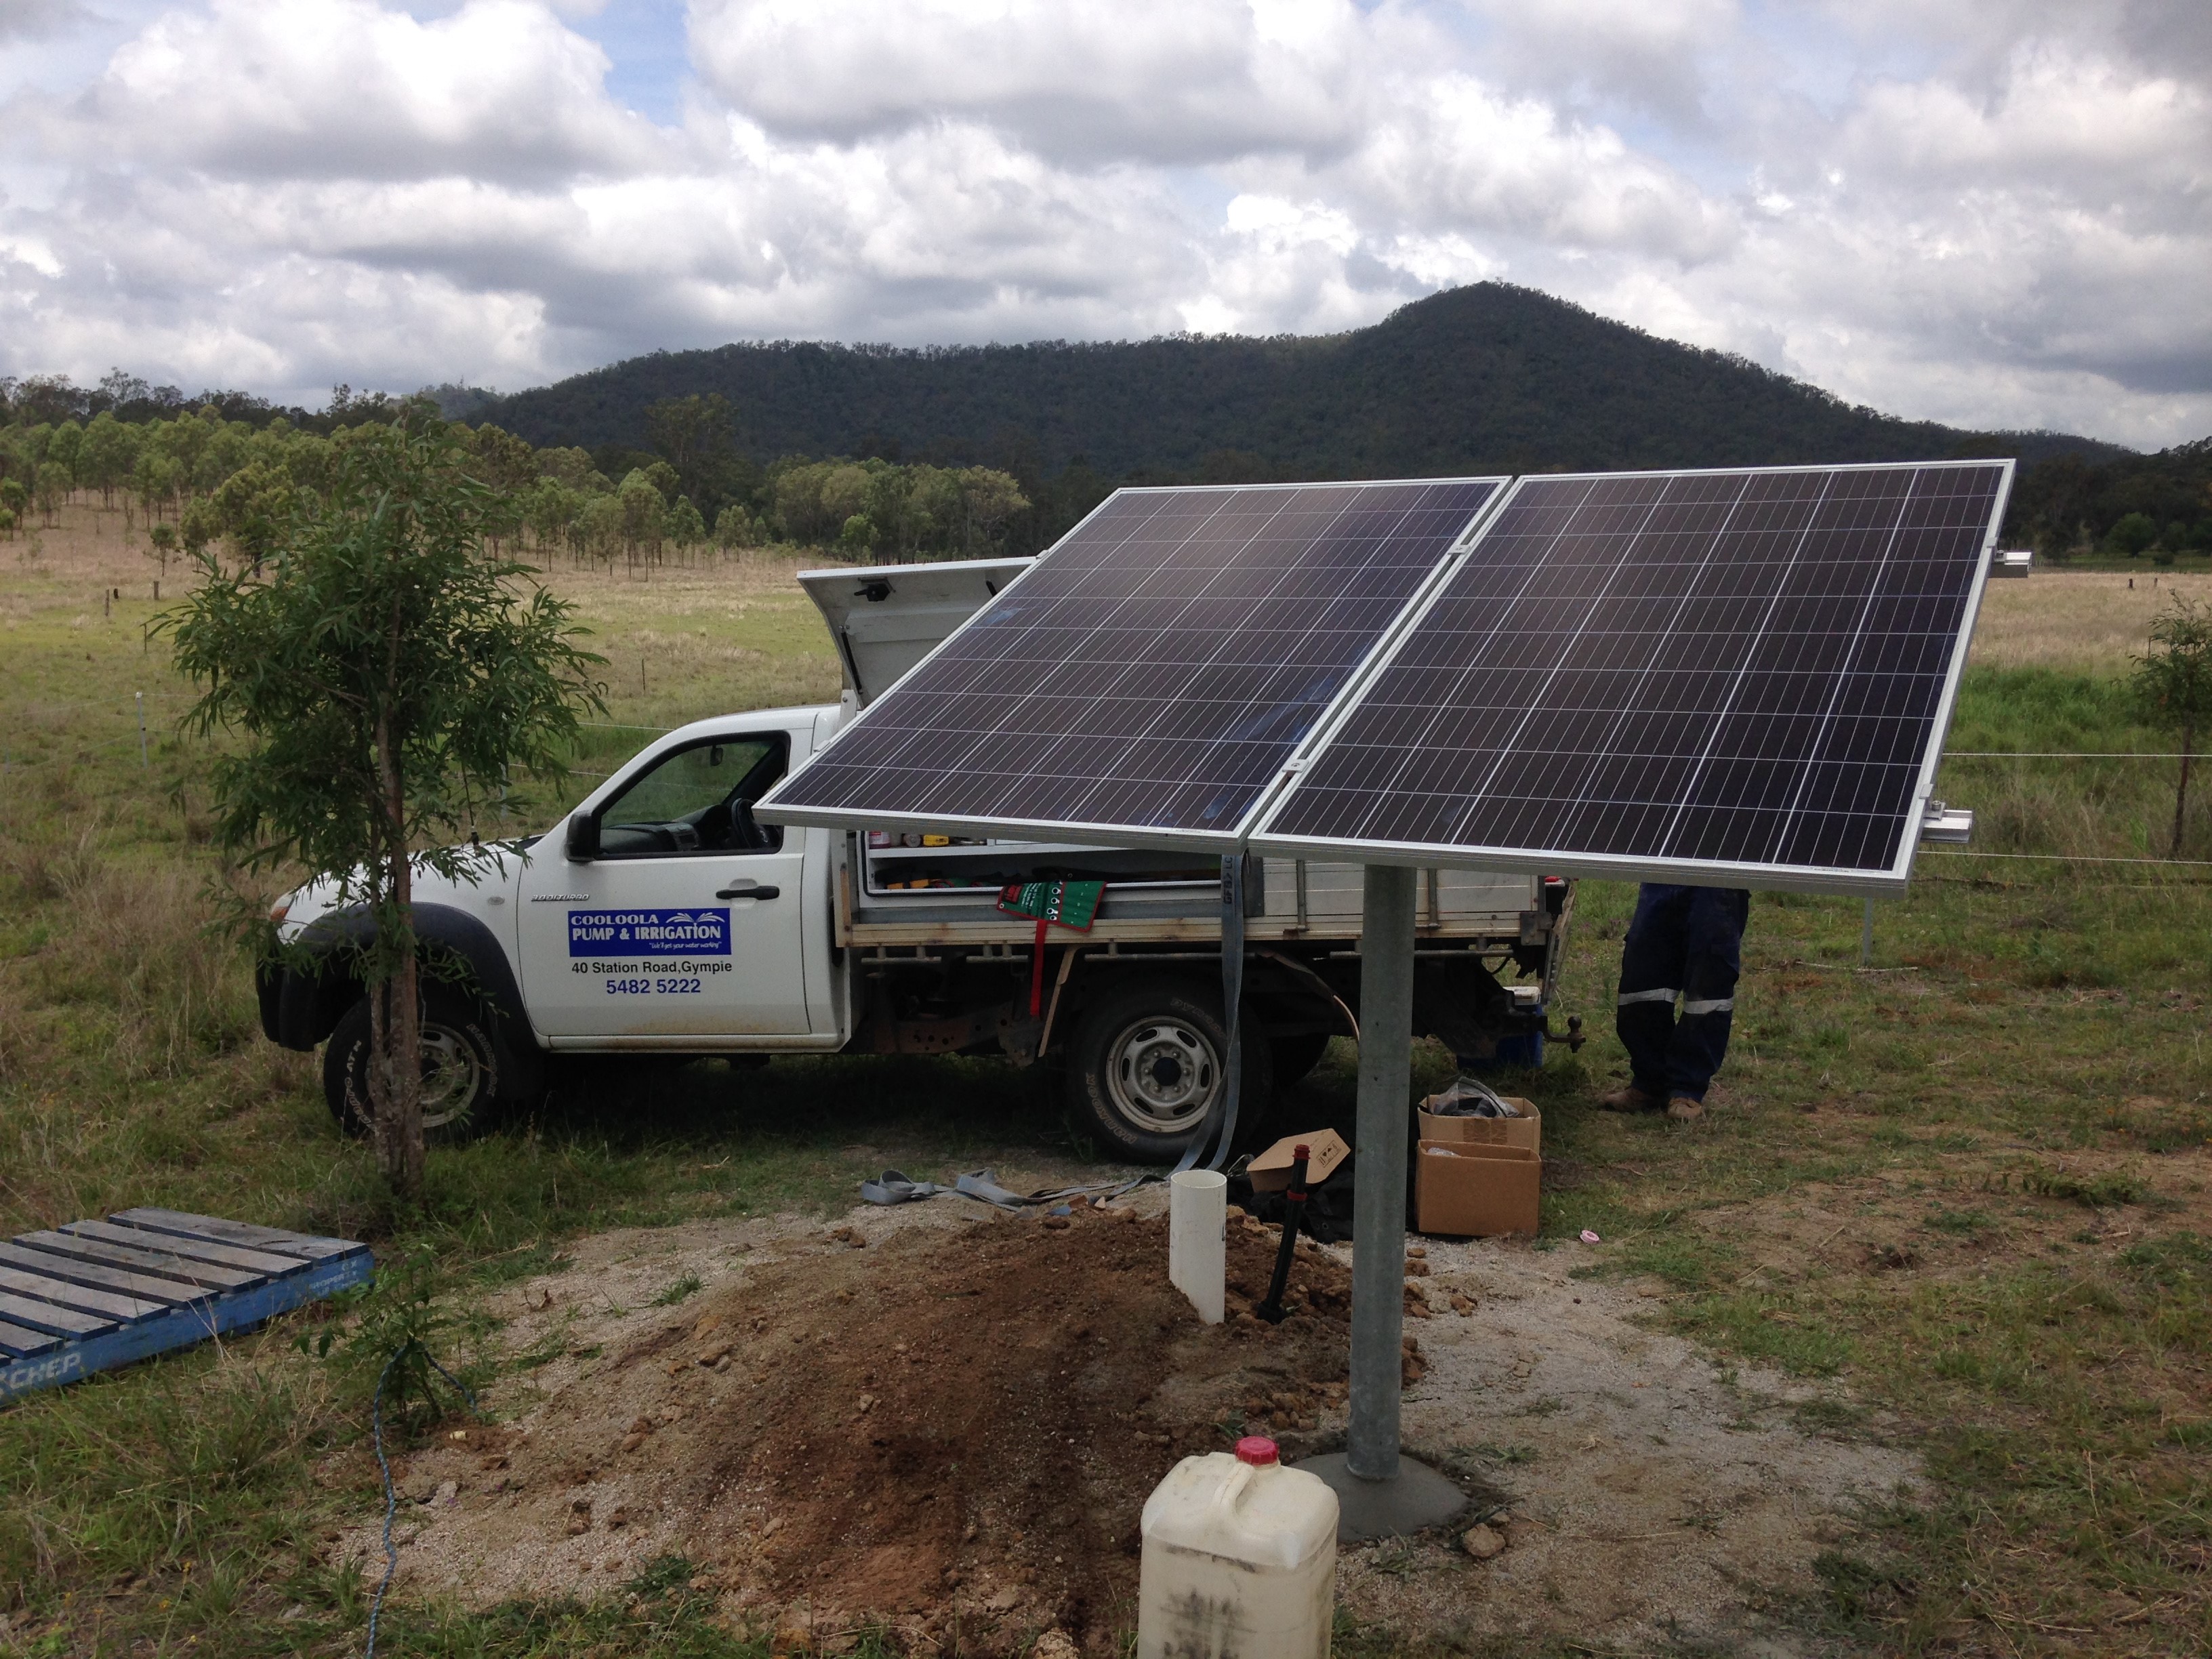 Images Cooloola Pump and Irrigation Pty Ltd